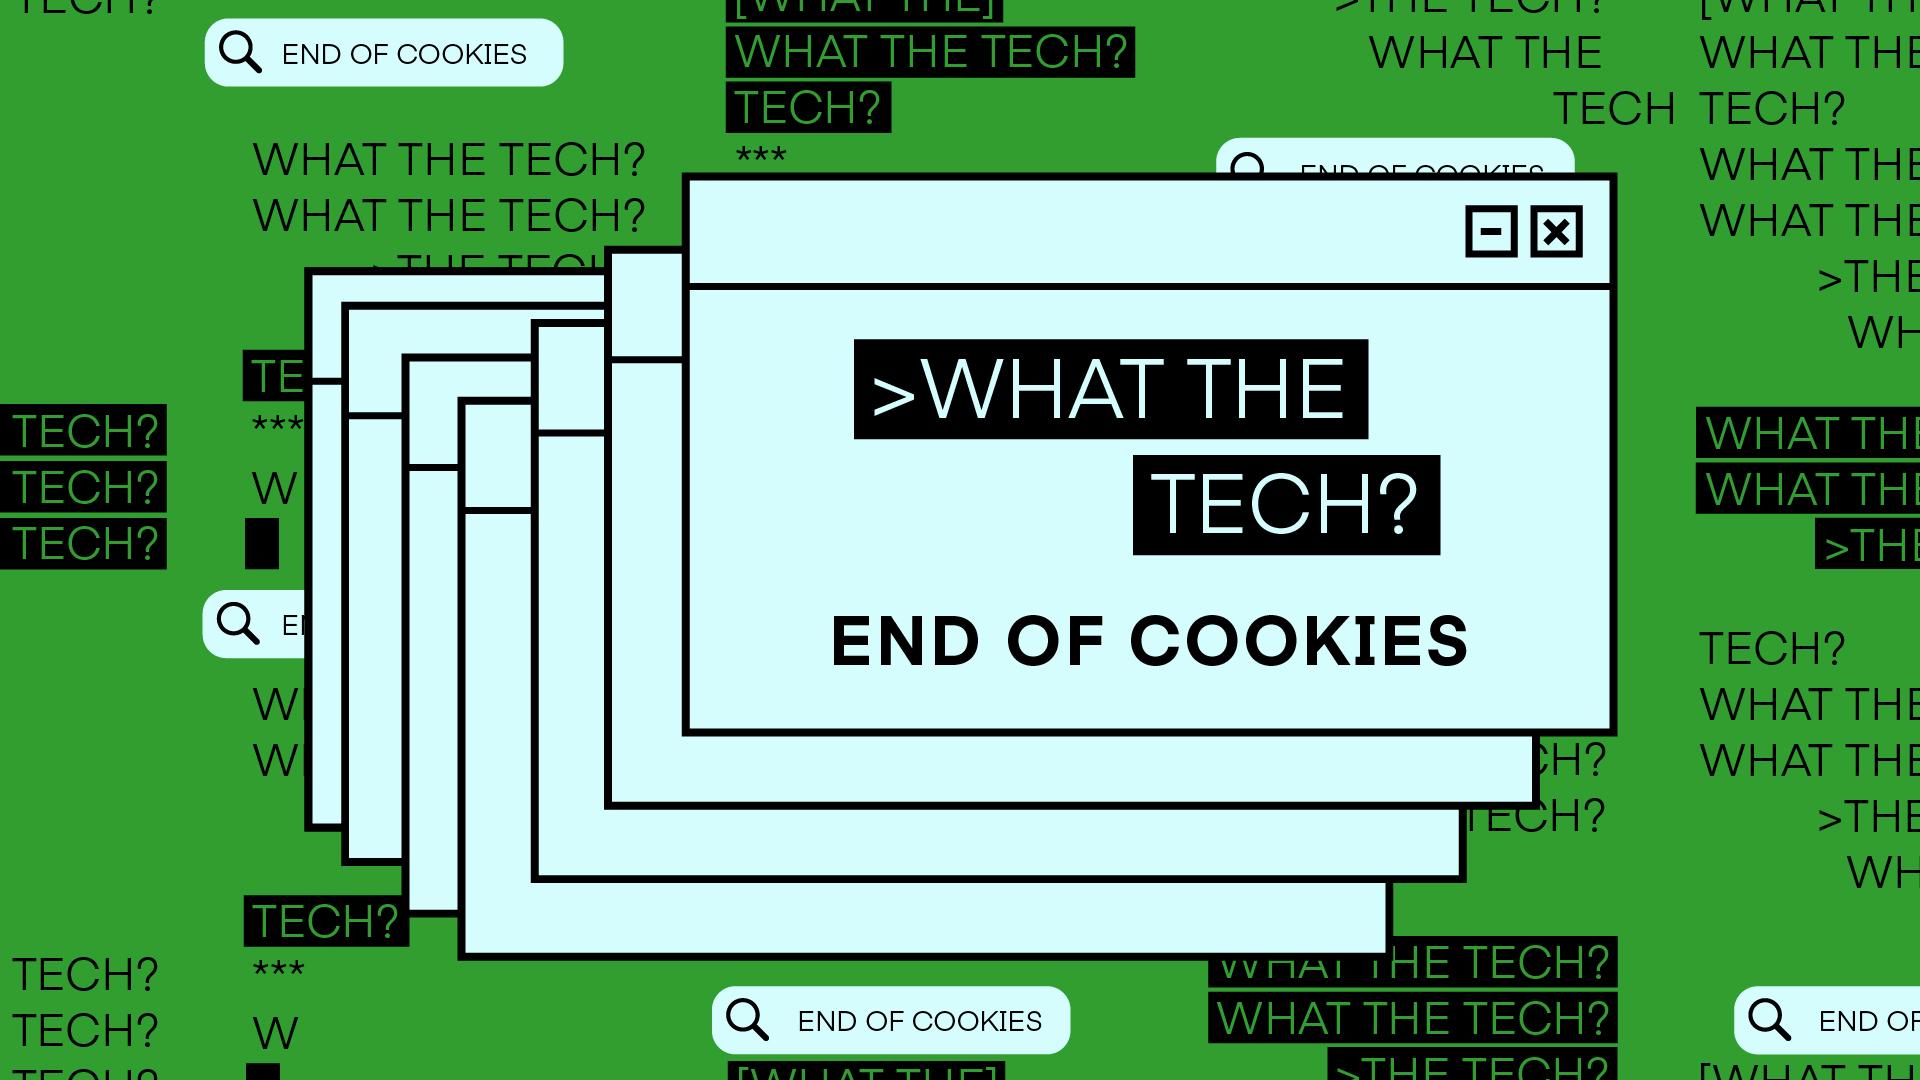 What the Tech is End of Cookies?